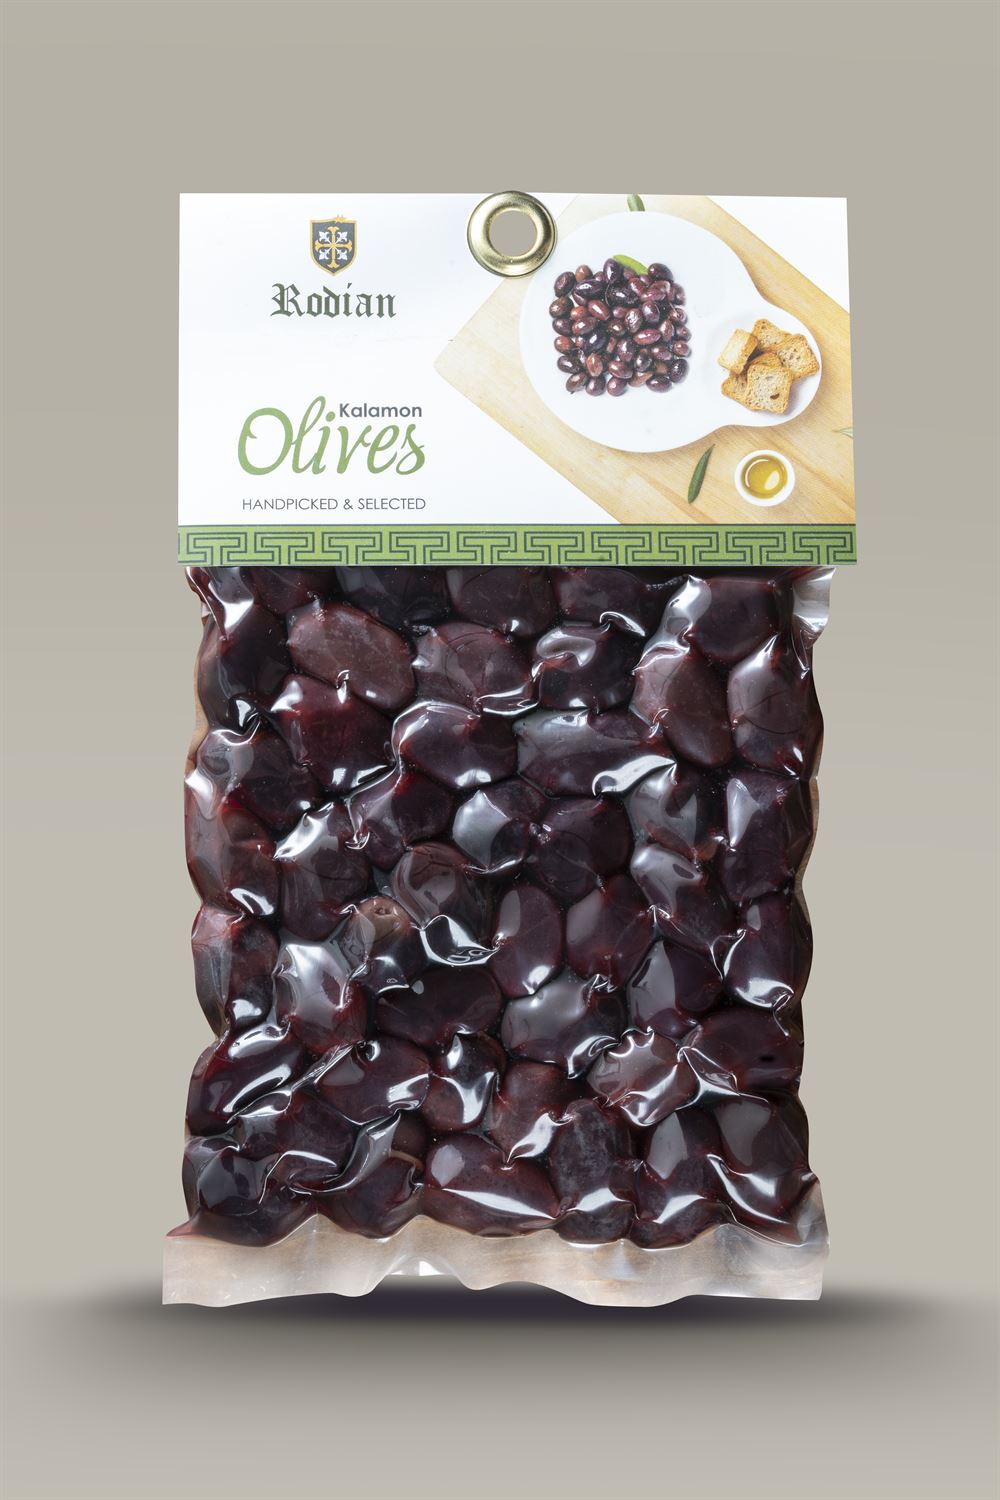 Kalamon Olives in vacuum - The best olives in Greece